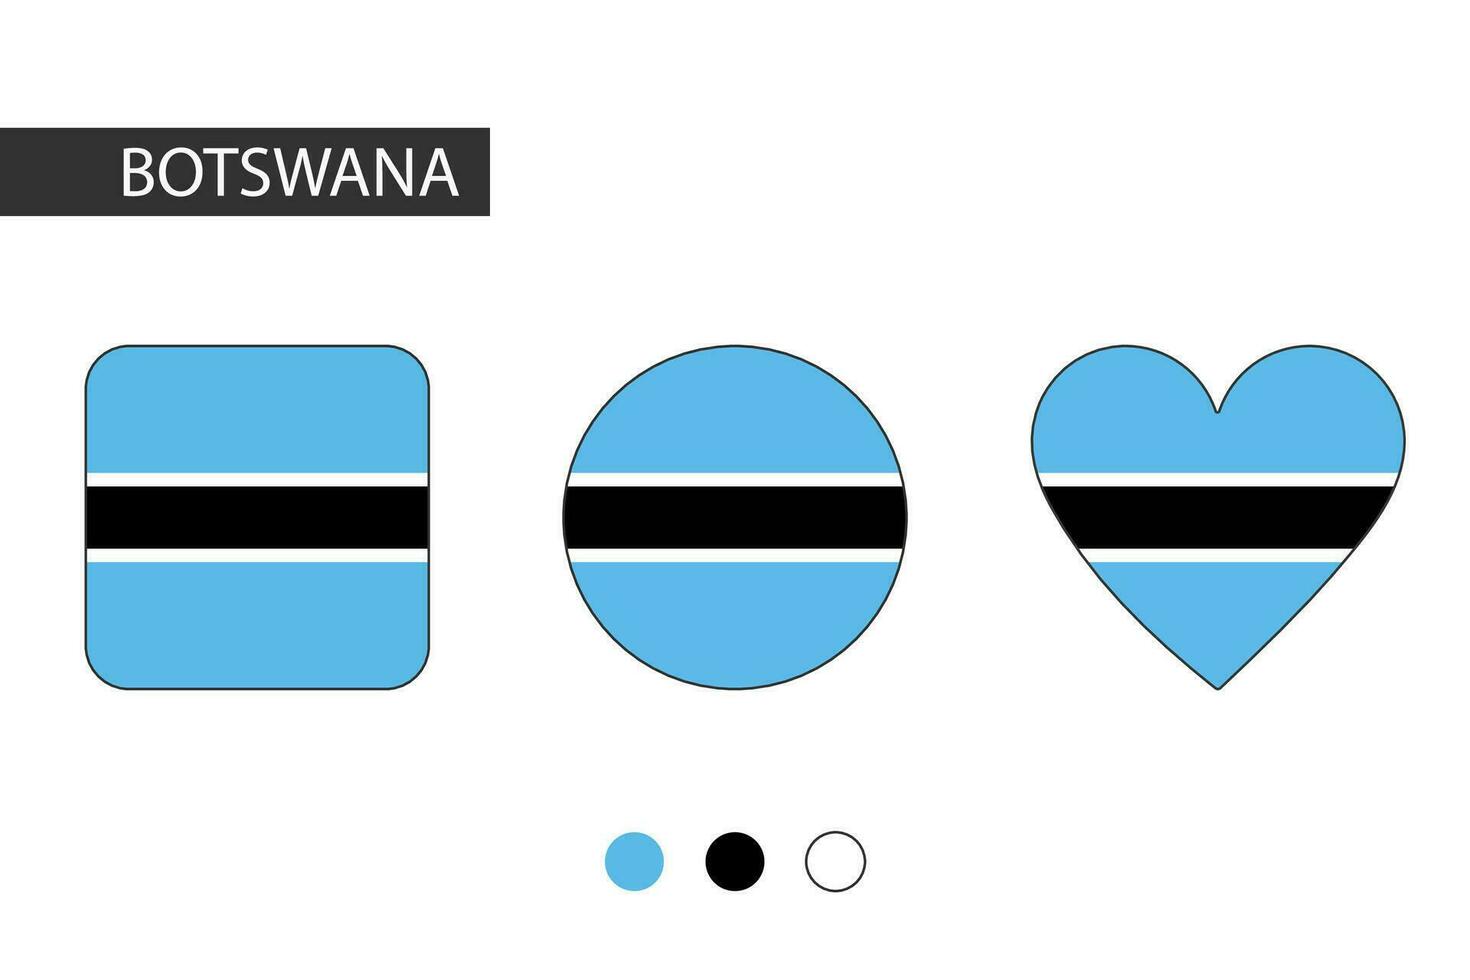 Botswana 3 shapes square, circle, heart with city flag. Isolated on white background. vector